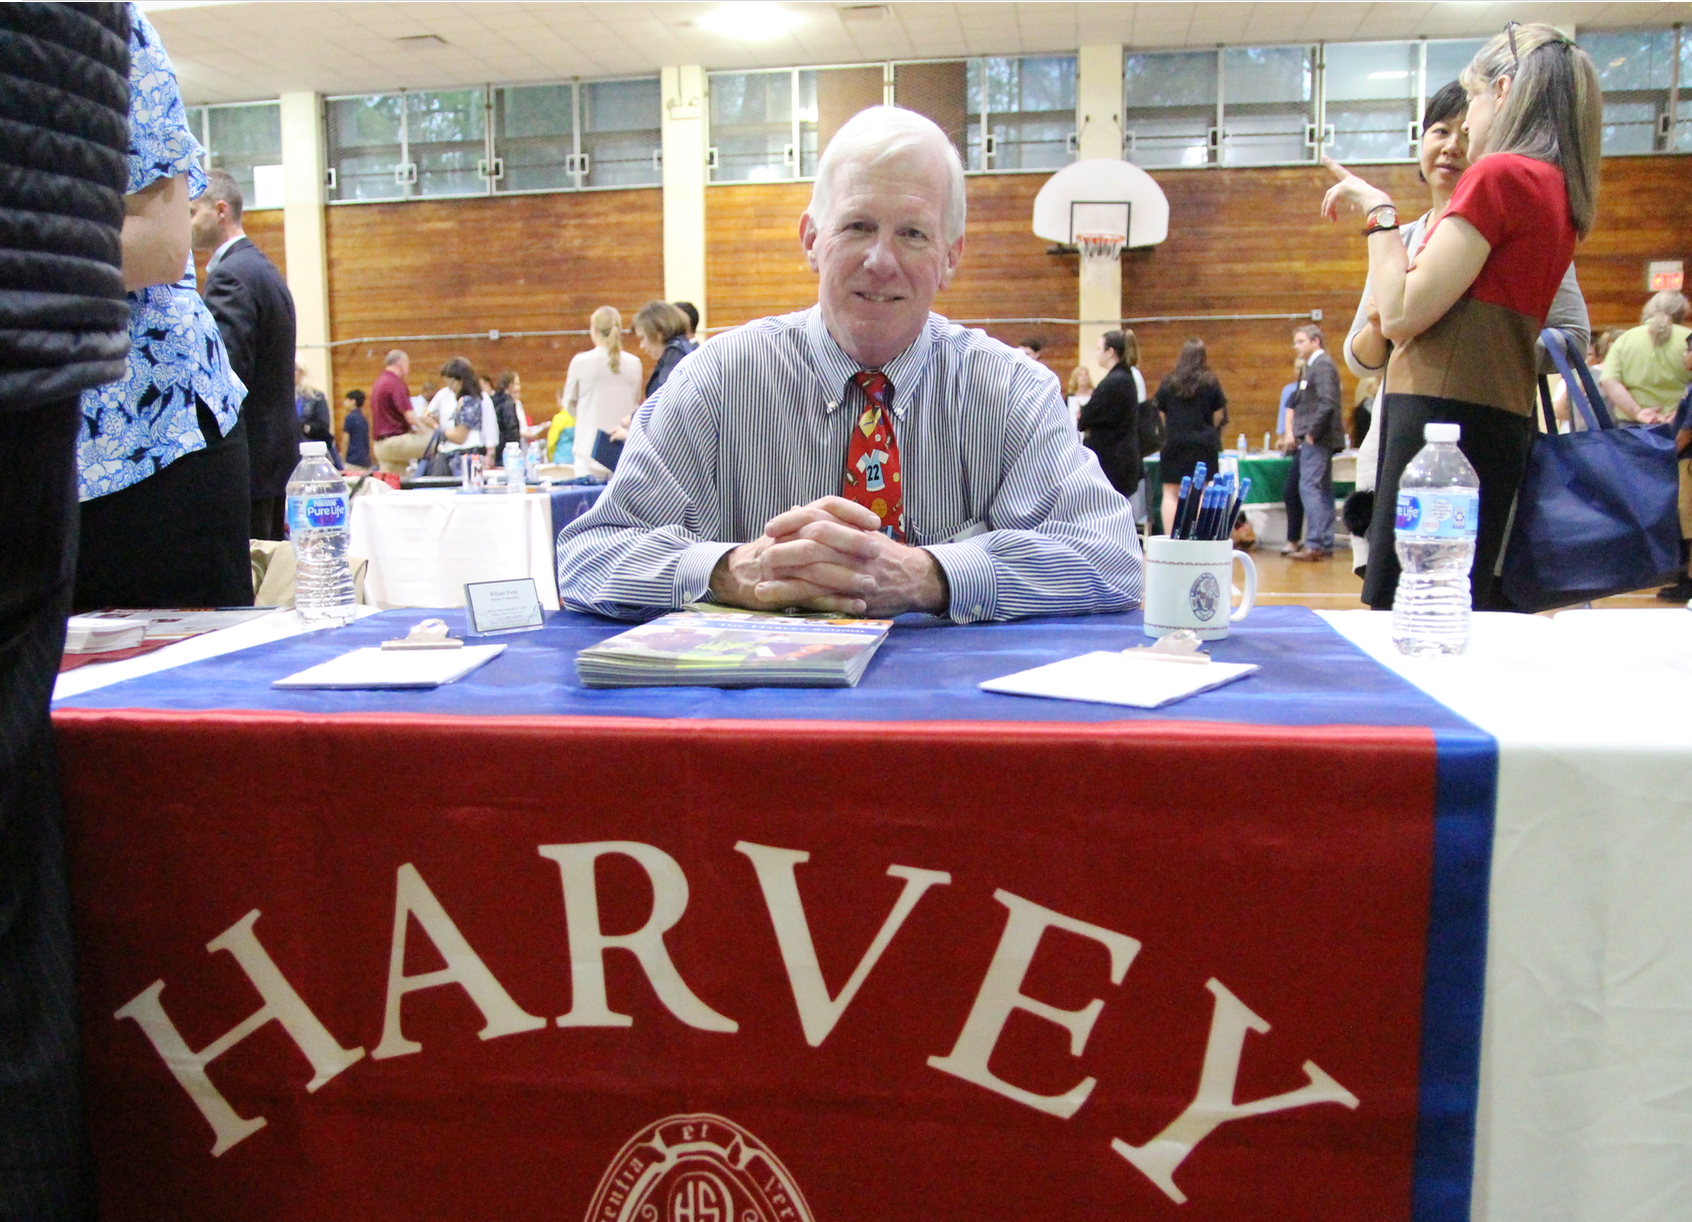 William Porter, Director of Admissions at The Harvey School in Katonah, NY at the Helen Woolworth, Associate Director of Admissions at Episcopal High School in Alexandria, Virginia at Greenwich Education Group's 9th annual Private Day & Boarding School Fair. May 15, 2018 Photo: Leslie Yager